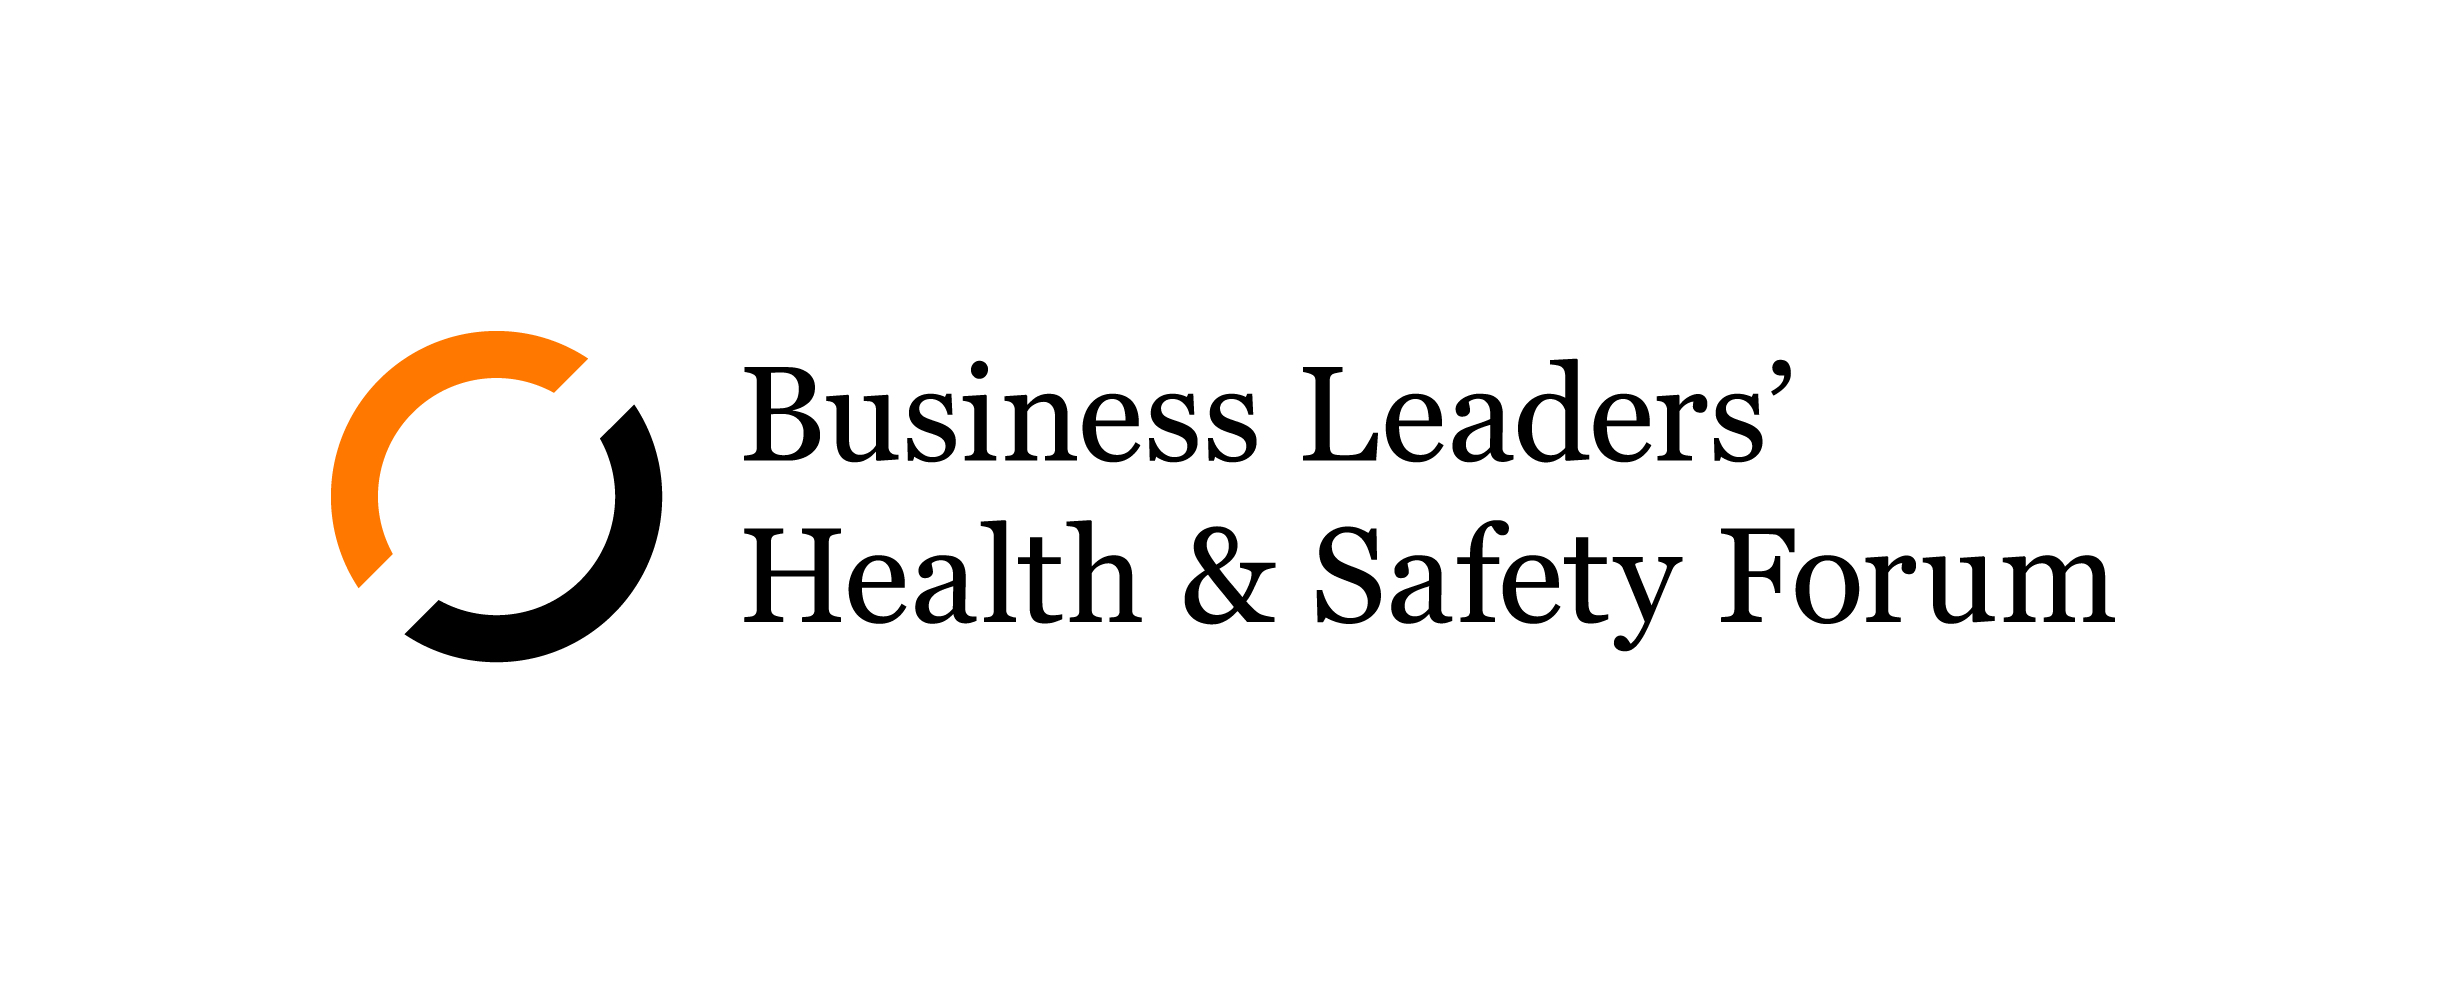 Business Leaders' Health & Safety Forum